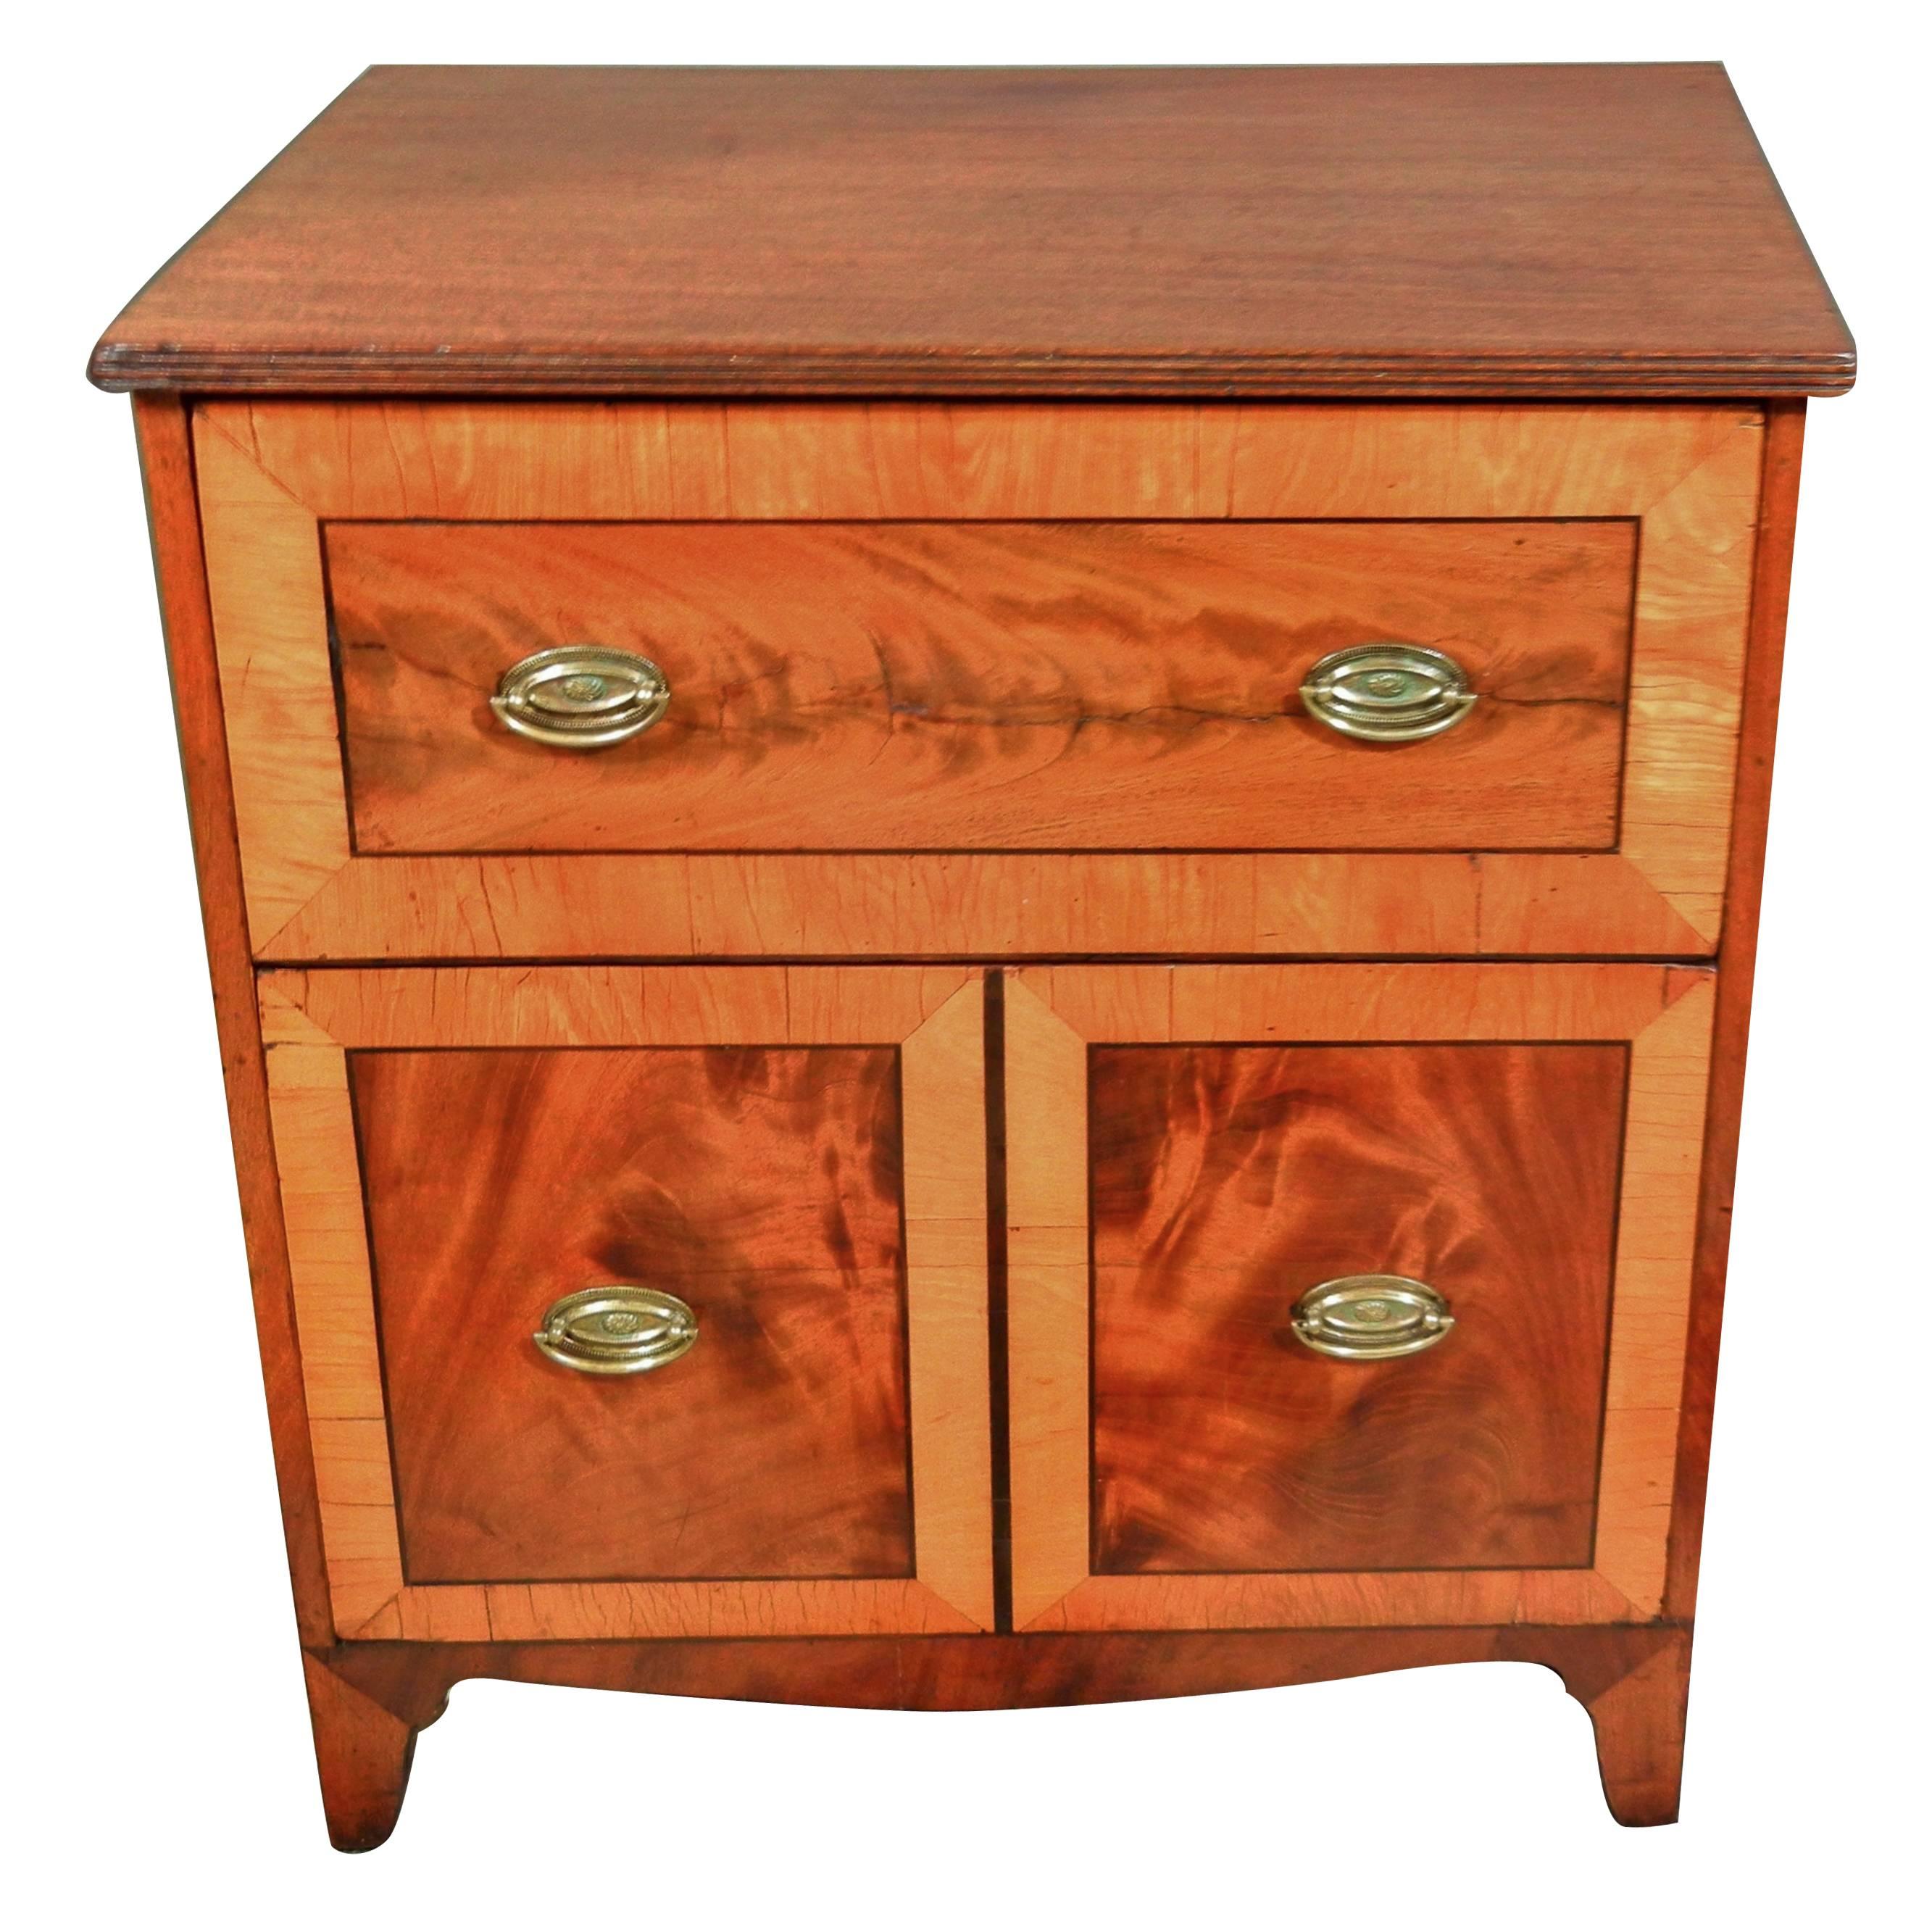 British Country-House Small Two-Drawer Chest, circa 1790